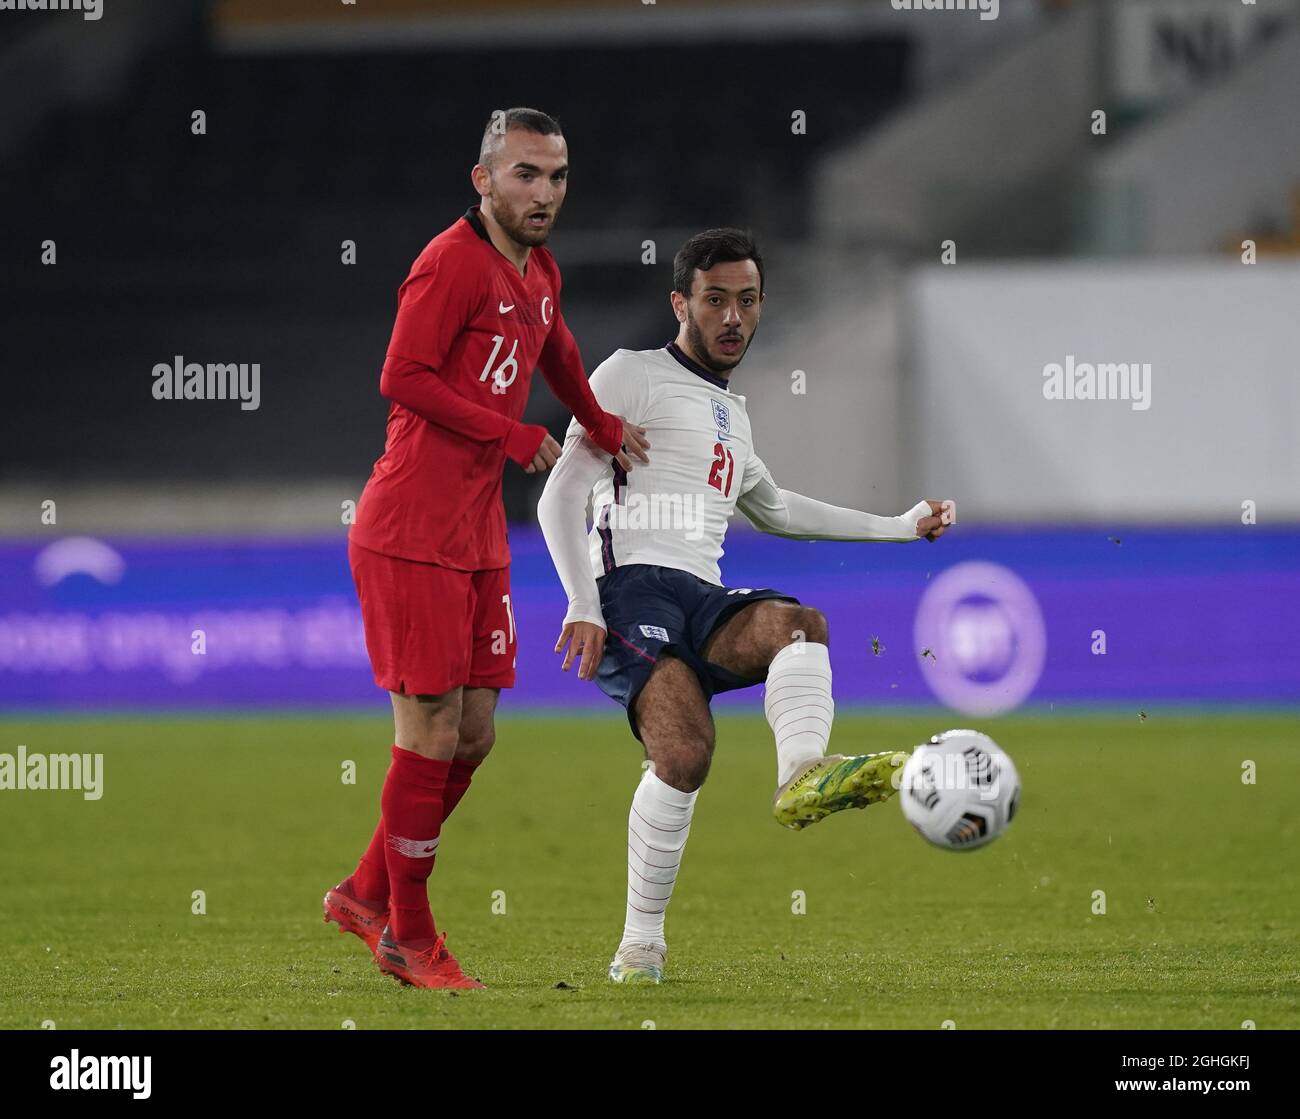 Dwight Marshall of England and  Erkan Eyibil of Turkey during the UEFA Euro U21 Qualifying match at Molineux, Wolverhampton. Picture date: 13th October 2020. Picture credit should read: Andrew Yates/Sportimage via PA Images Stock Photo